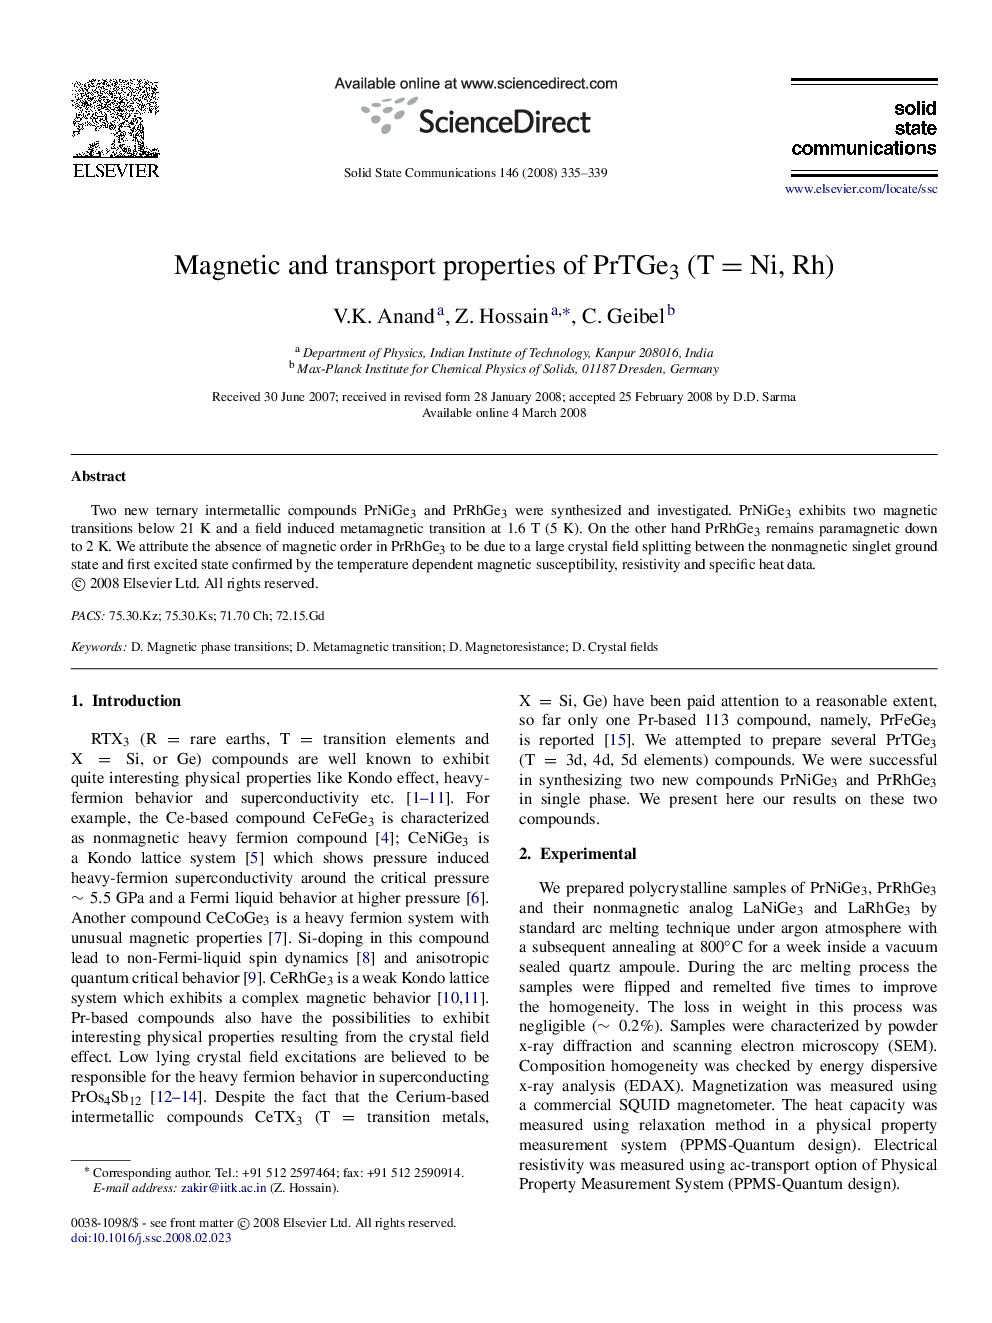 Magnetic and transport properties of PrTGe 3 (T = Ni, Rh)